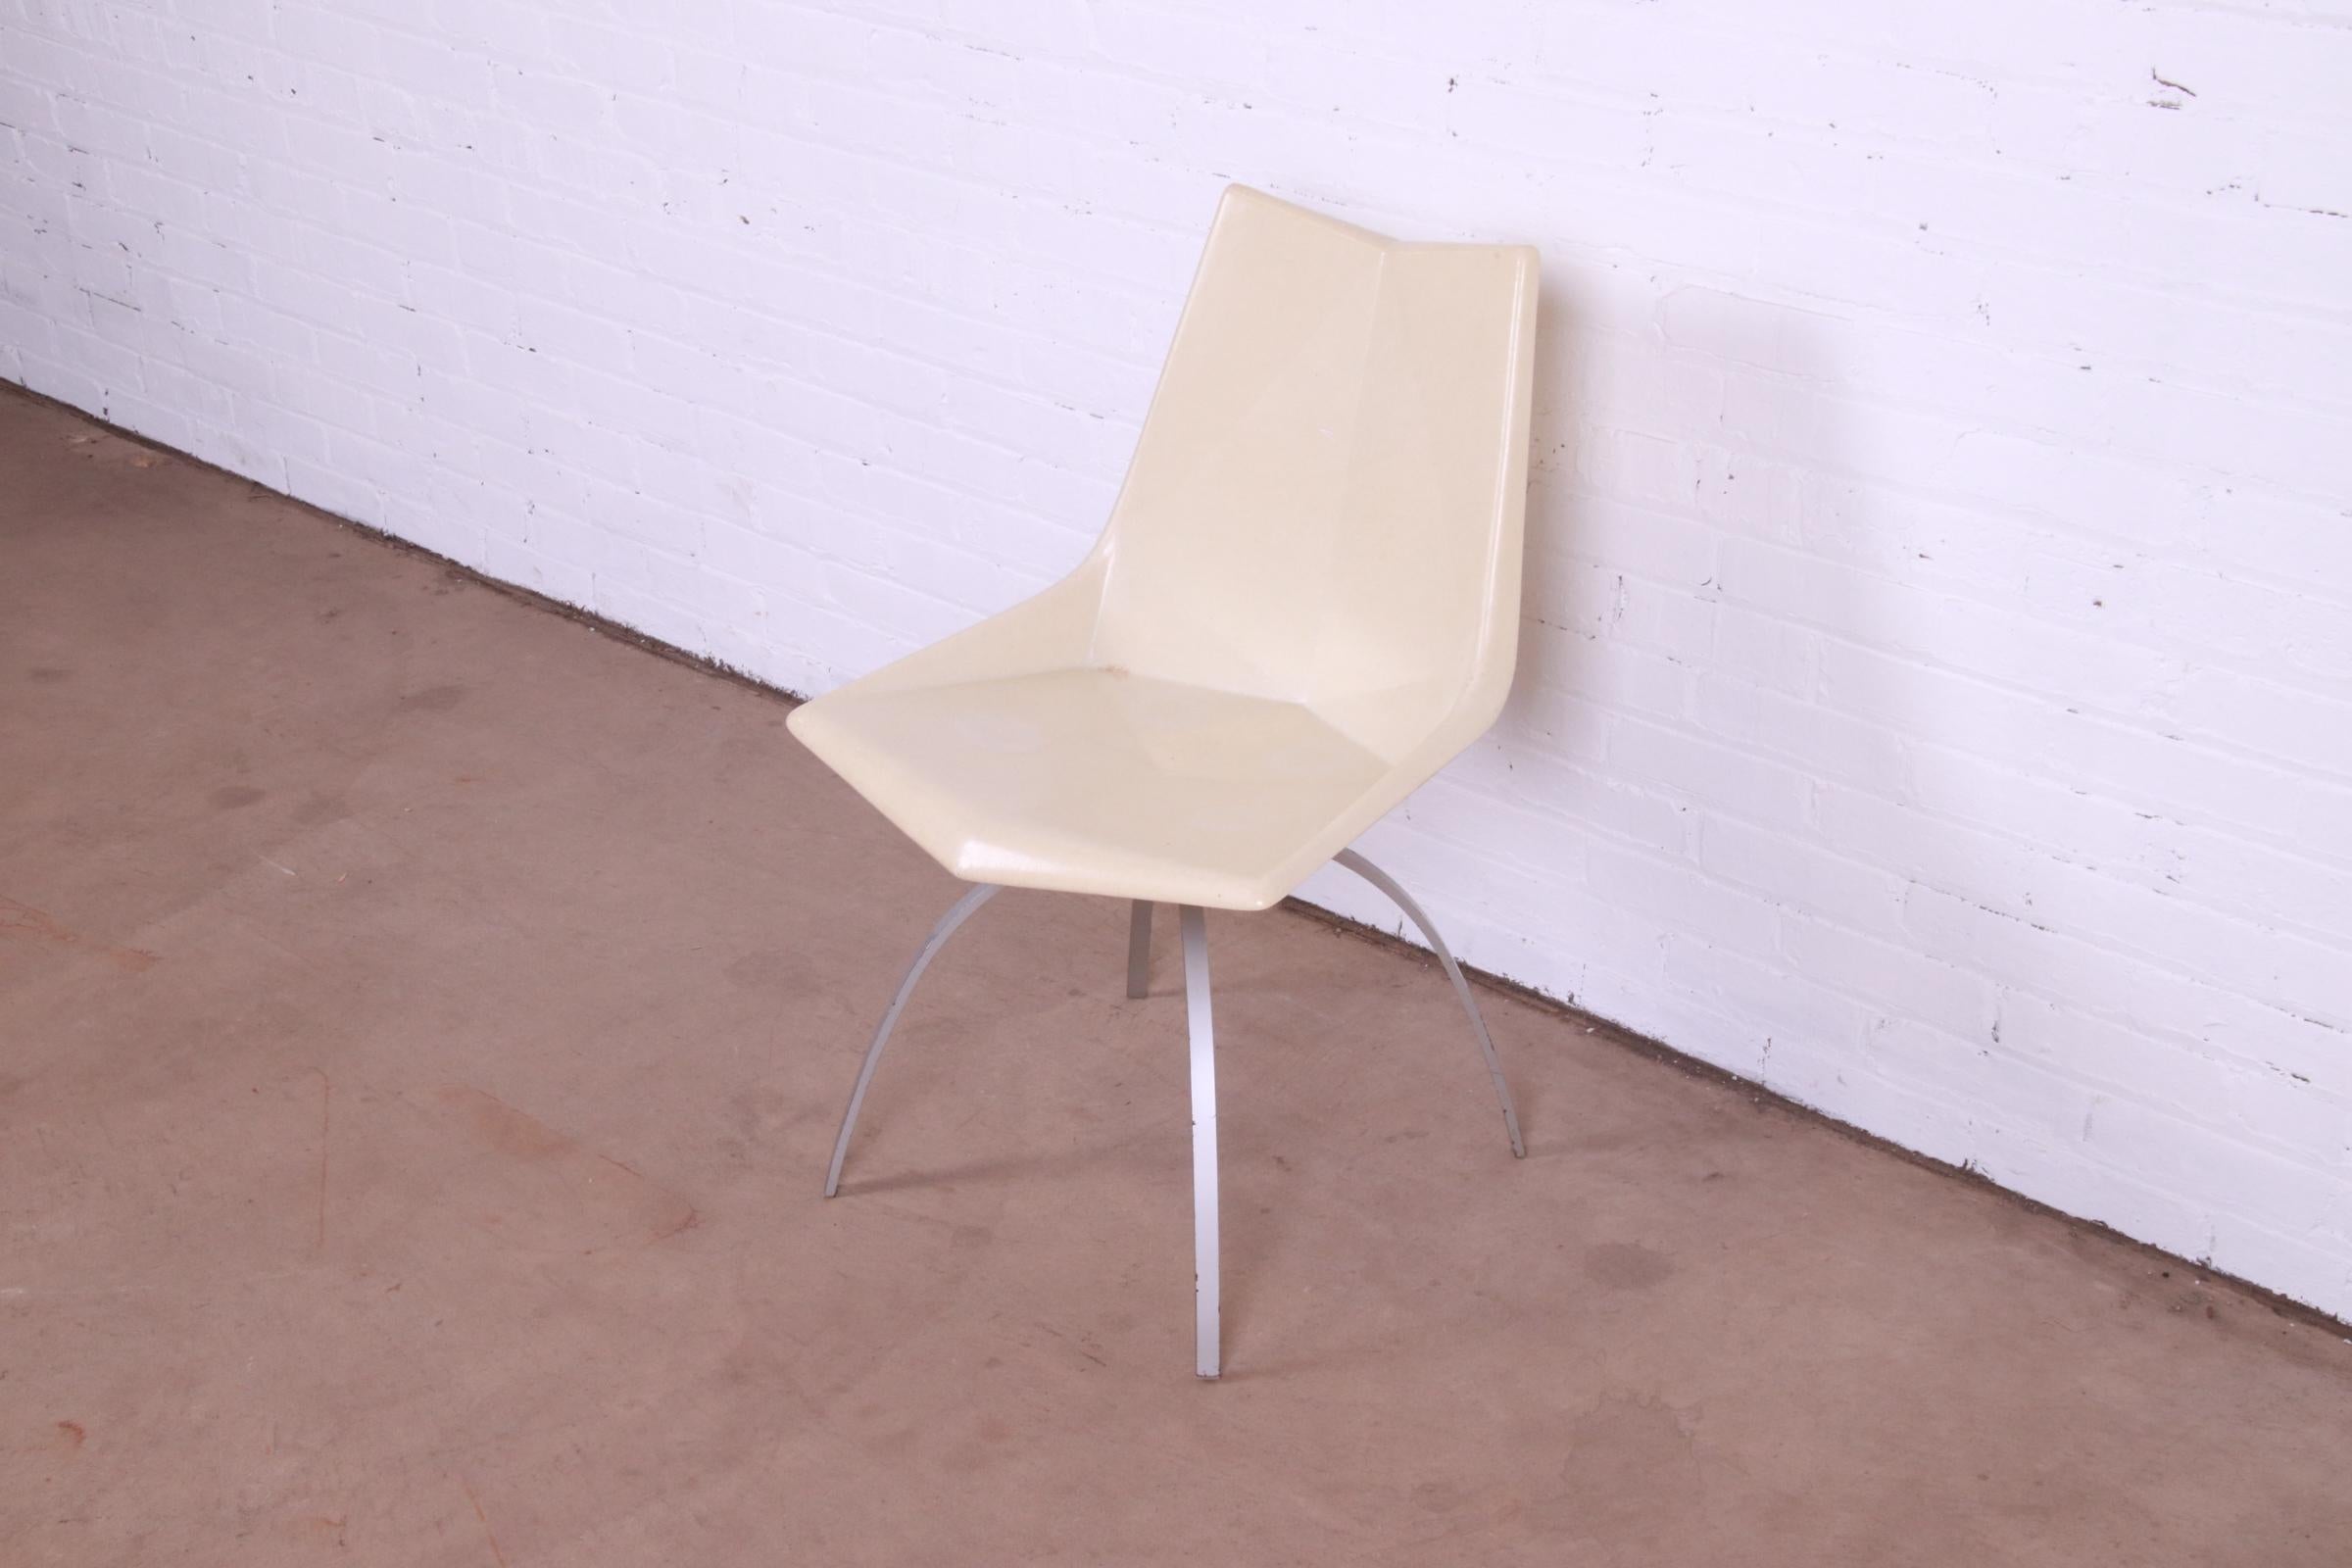 Paul McCobb Mid-Century Modern Fiberglass Origami Chair on Spider Base, 1950s In Good Condition For Sale In South Bend, IN